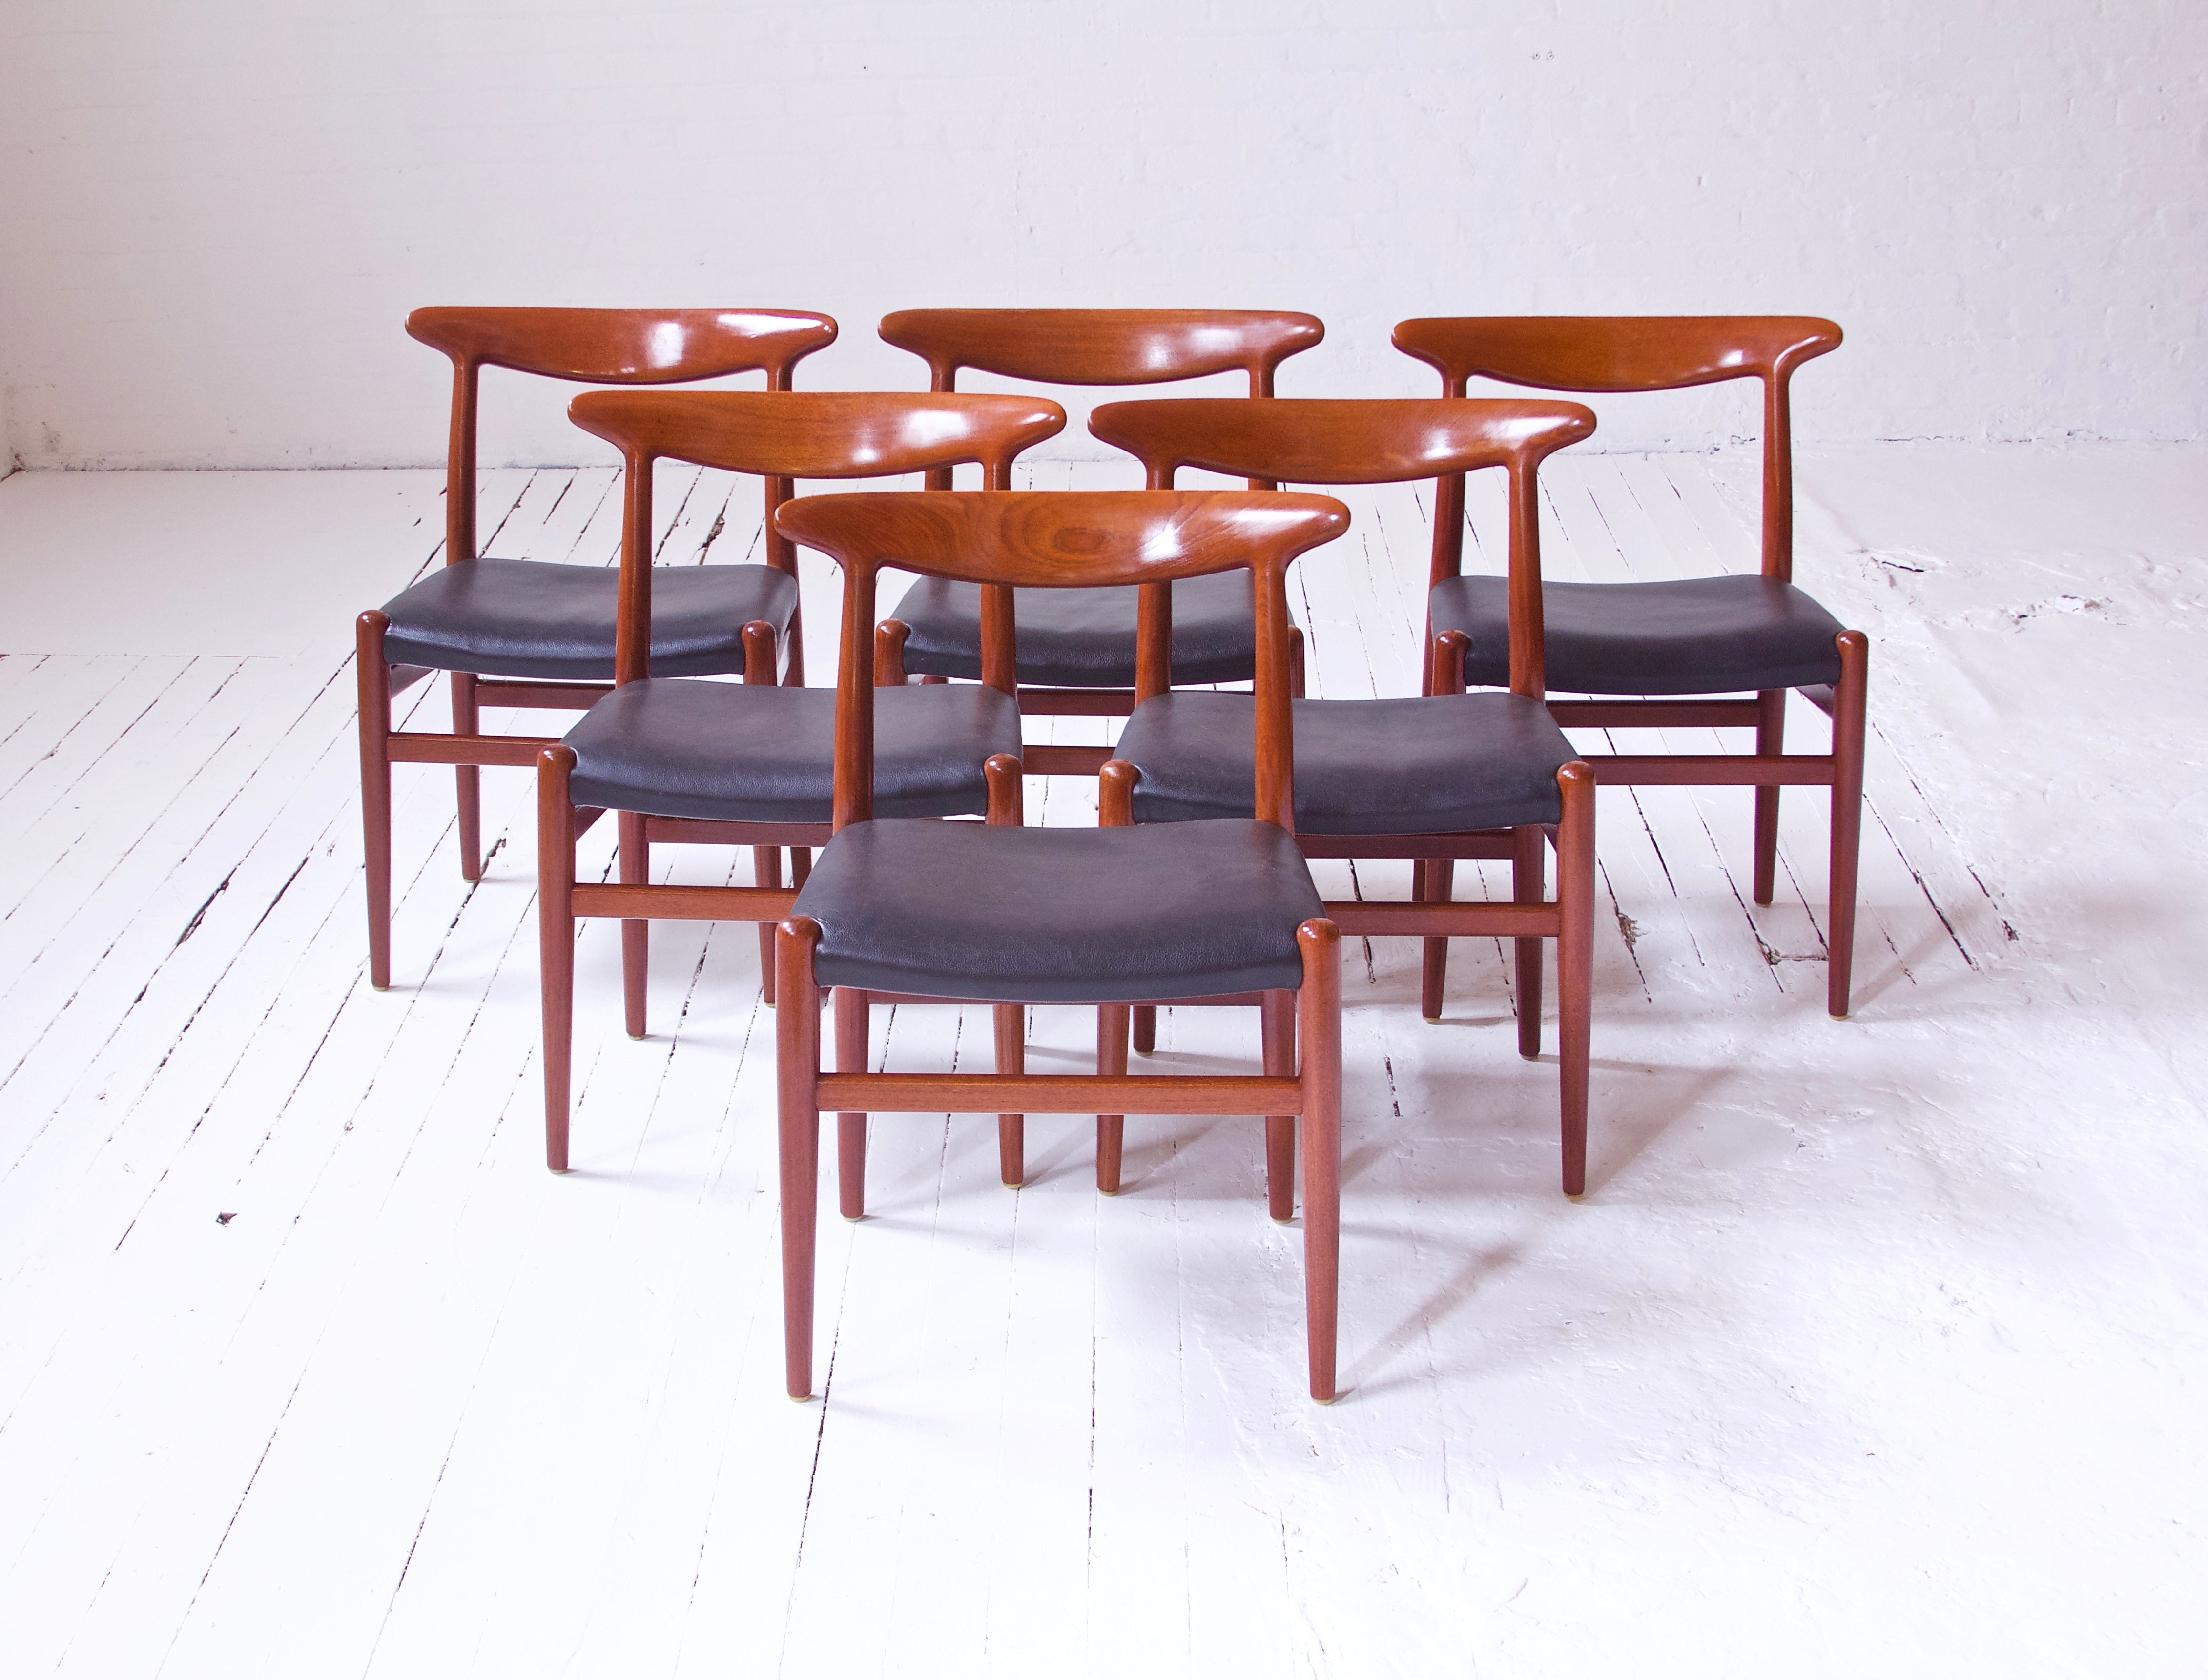 An iconic example of Wegner's historic oeuvre within the field of Scandinavian seating design, here we have a gorgeously preserved set of six 